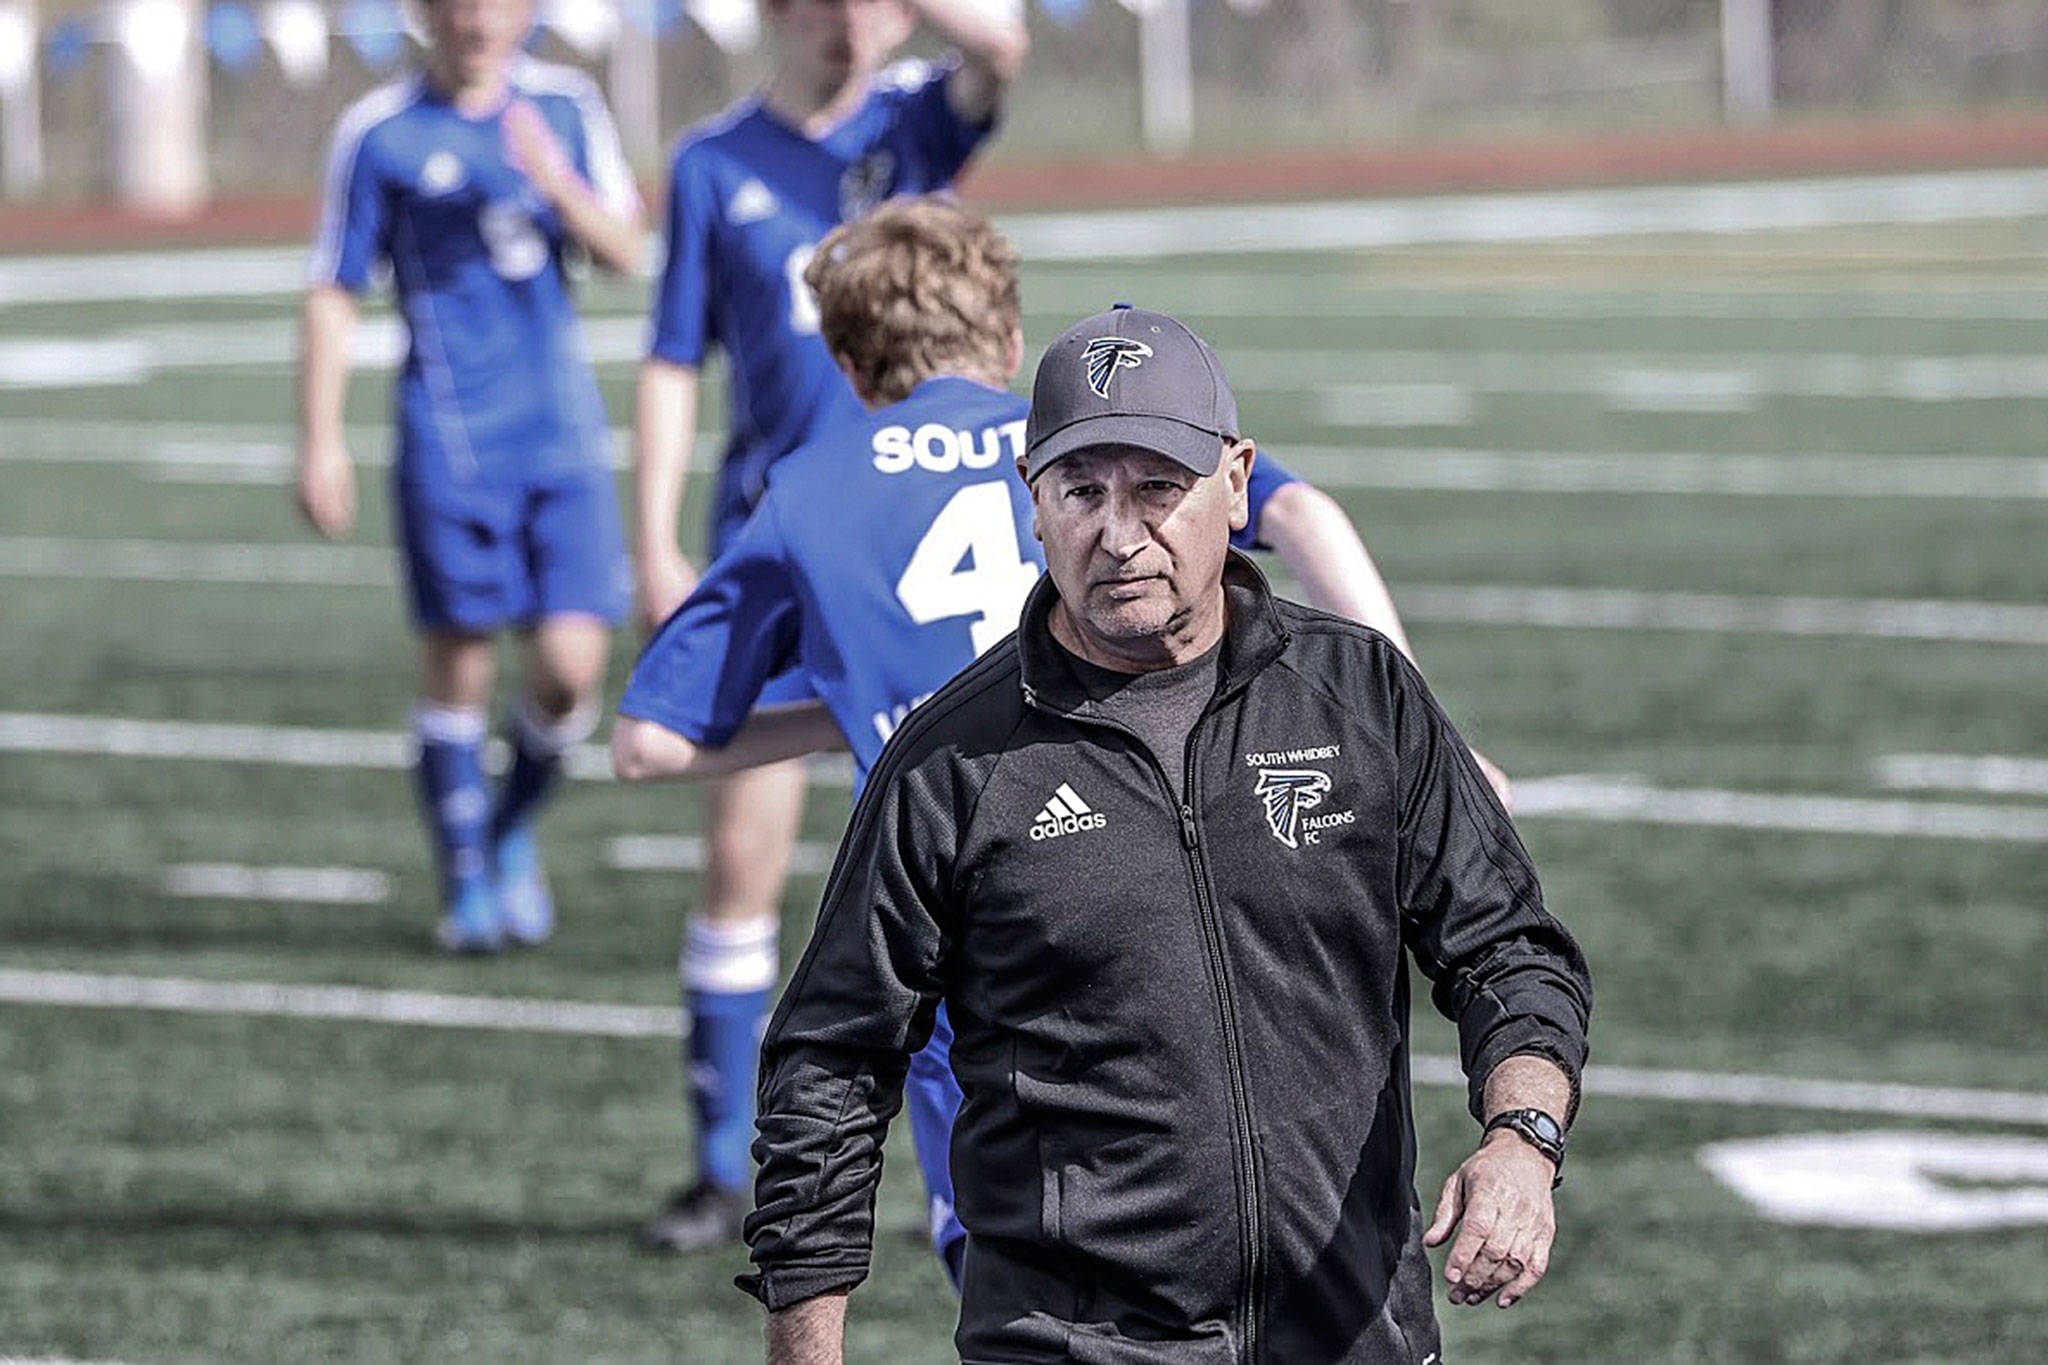 Emerson Robbins, who resigned after coaching the South Whidbey High School varsity boys soccer team for seven years, wrote a book about his earlier soccer squads. (Photo by Matt Simms)